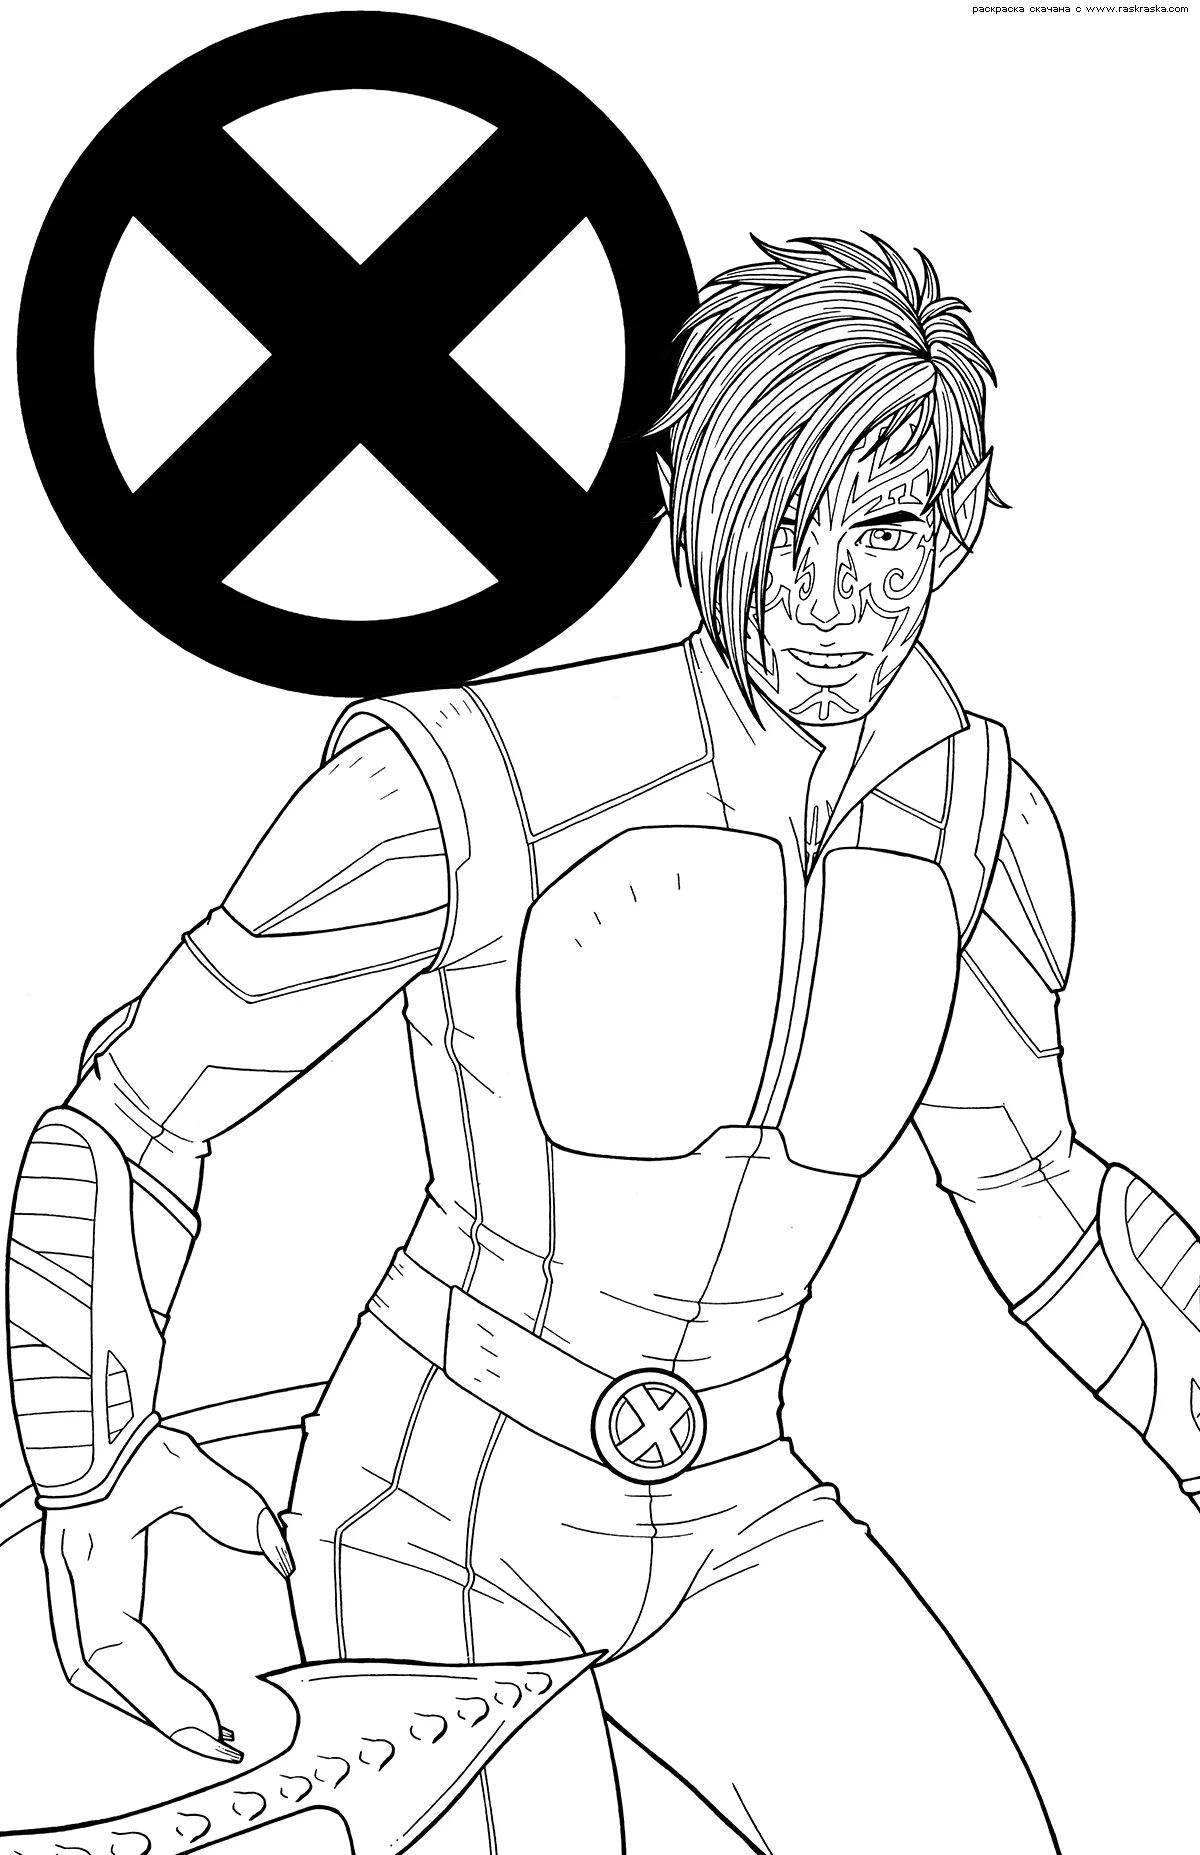 Involving x-men start viewing coloring pages